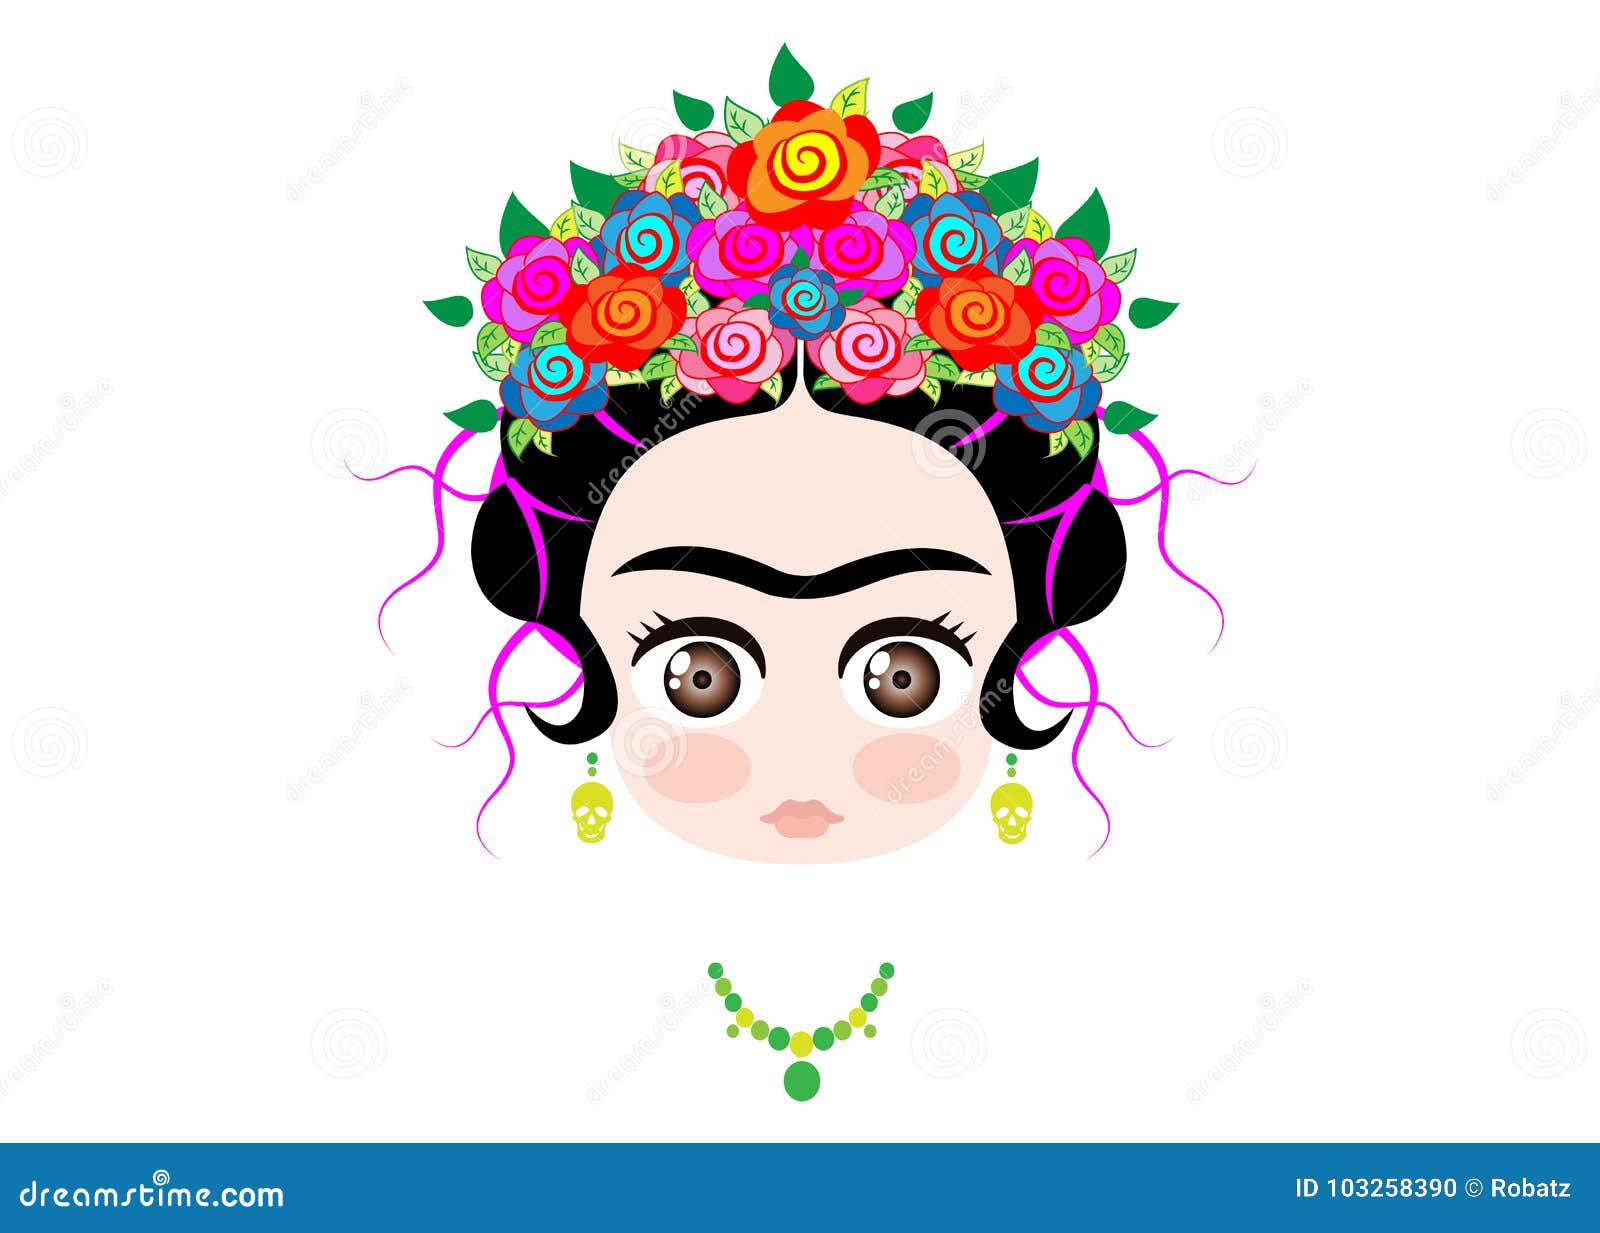 emoji baby frida kahlo with crown of colorful flowers, 